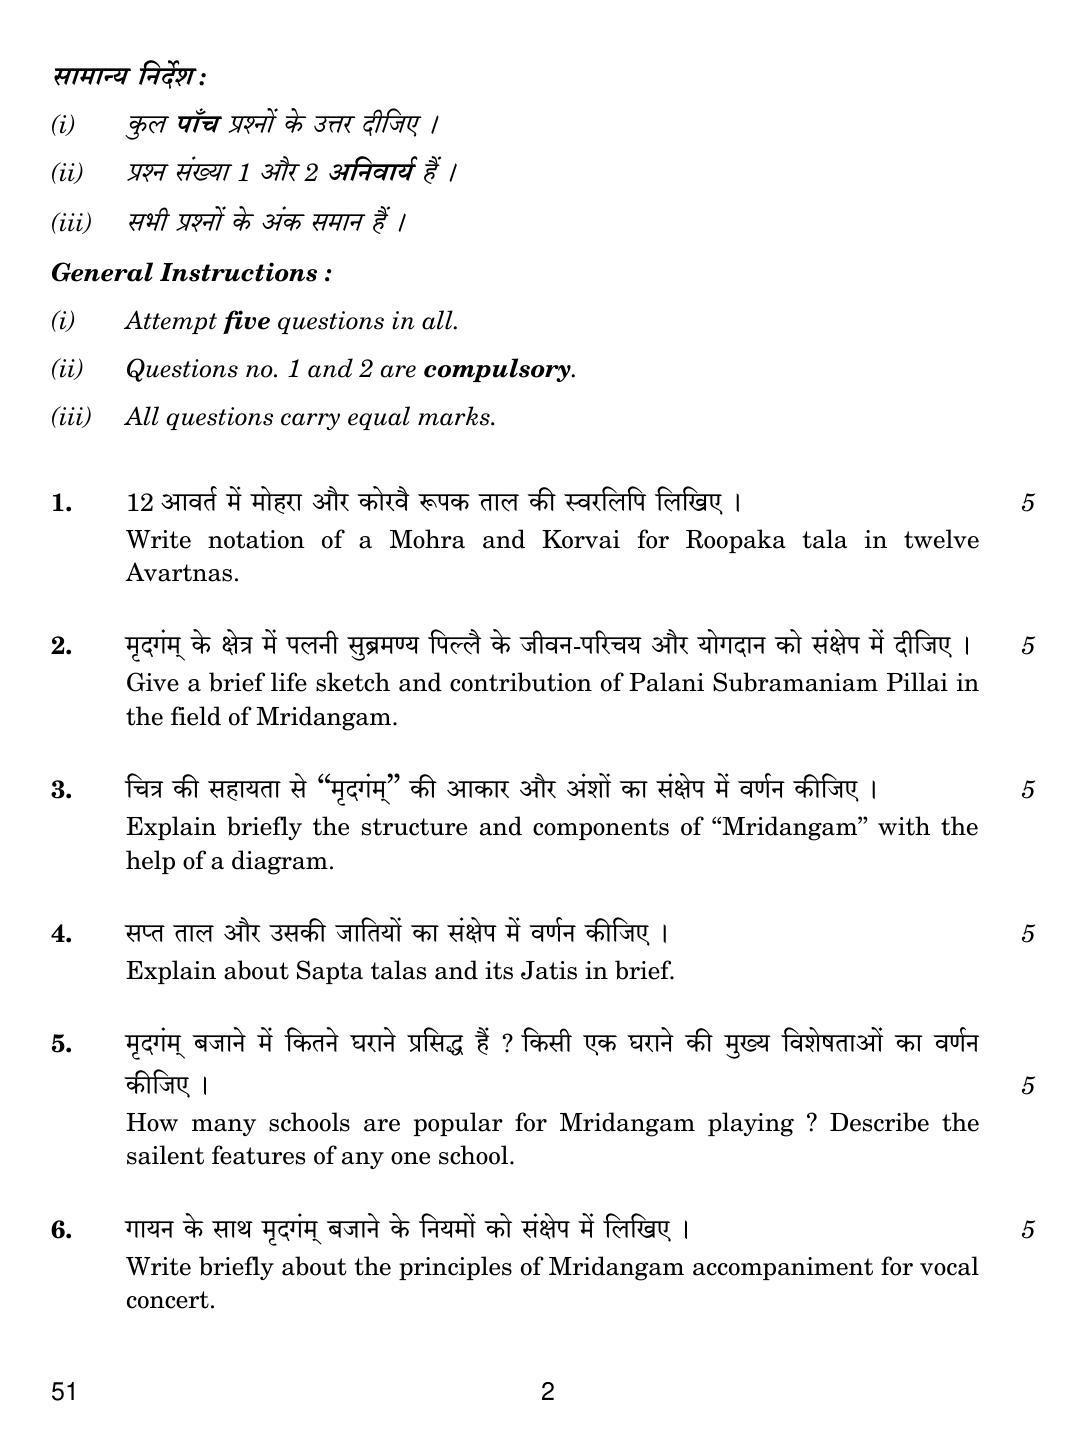 CBSE Class 10 51 CARNATIC MUSIC (Percussion Instruments) 2019 Question Paper - Page 2